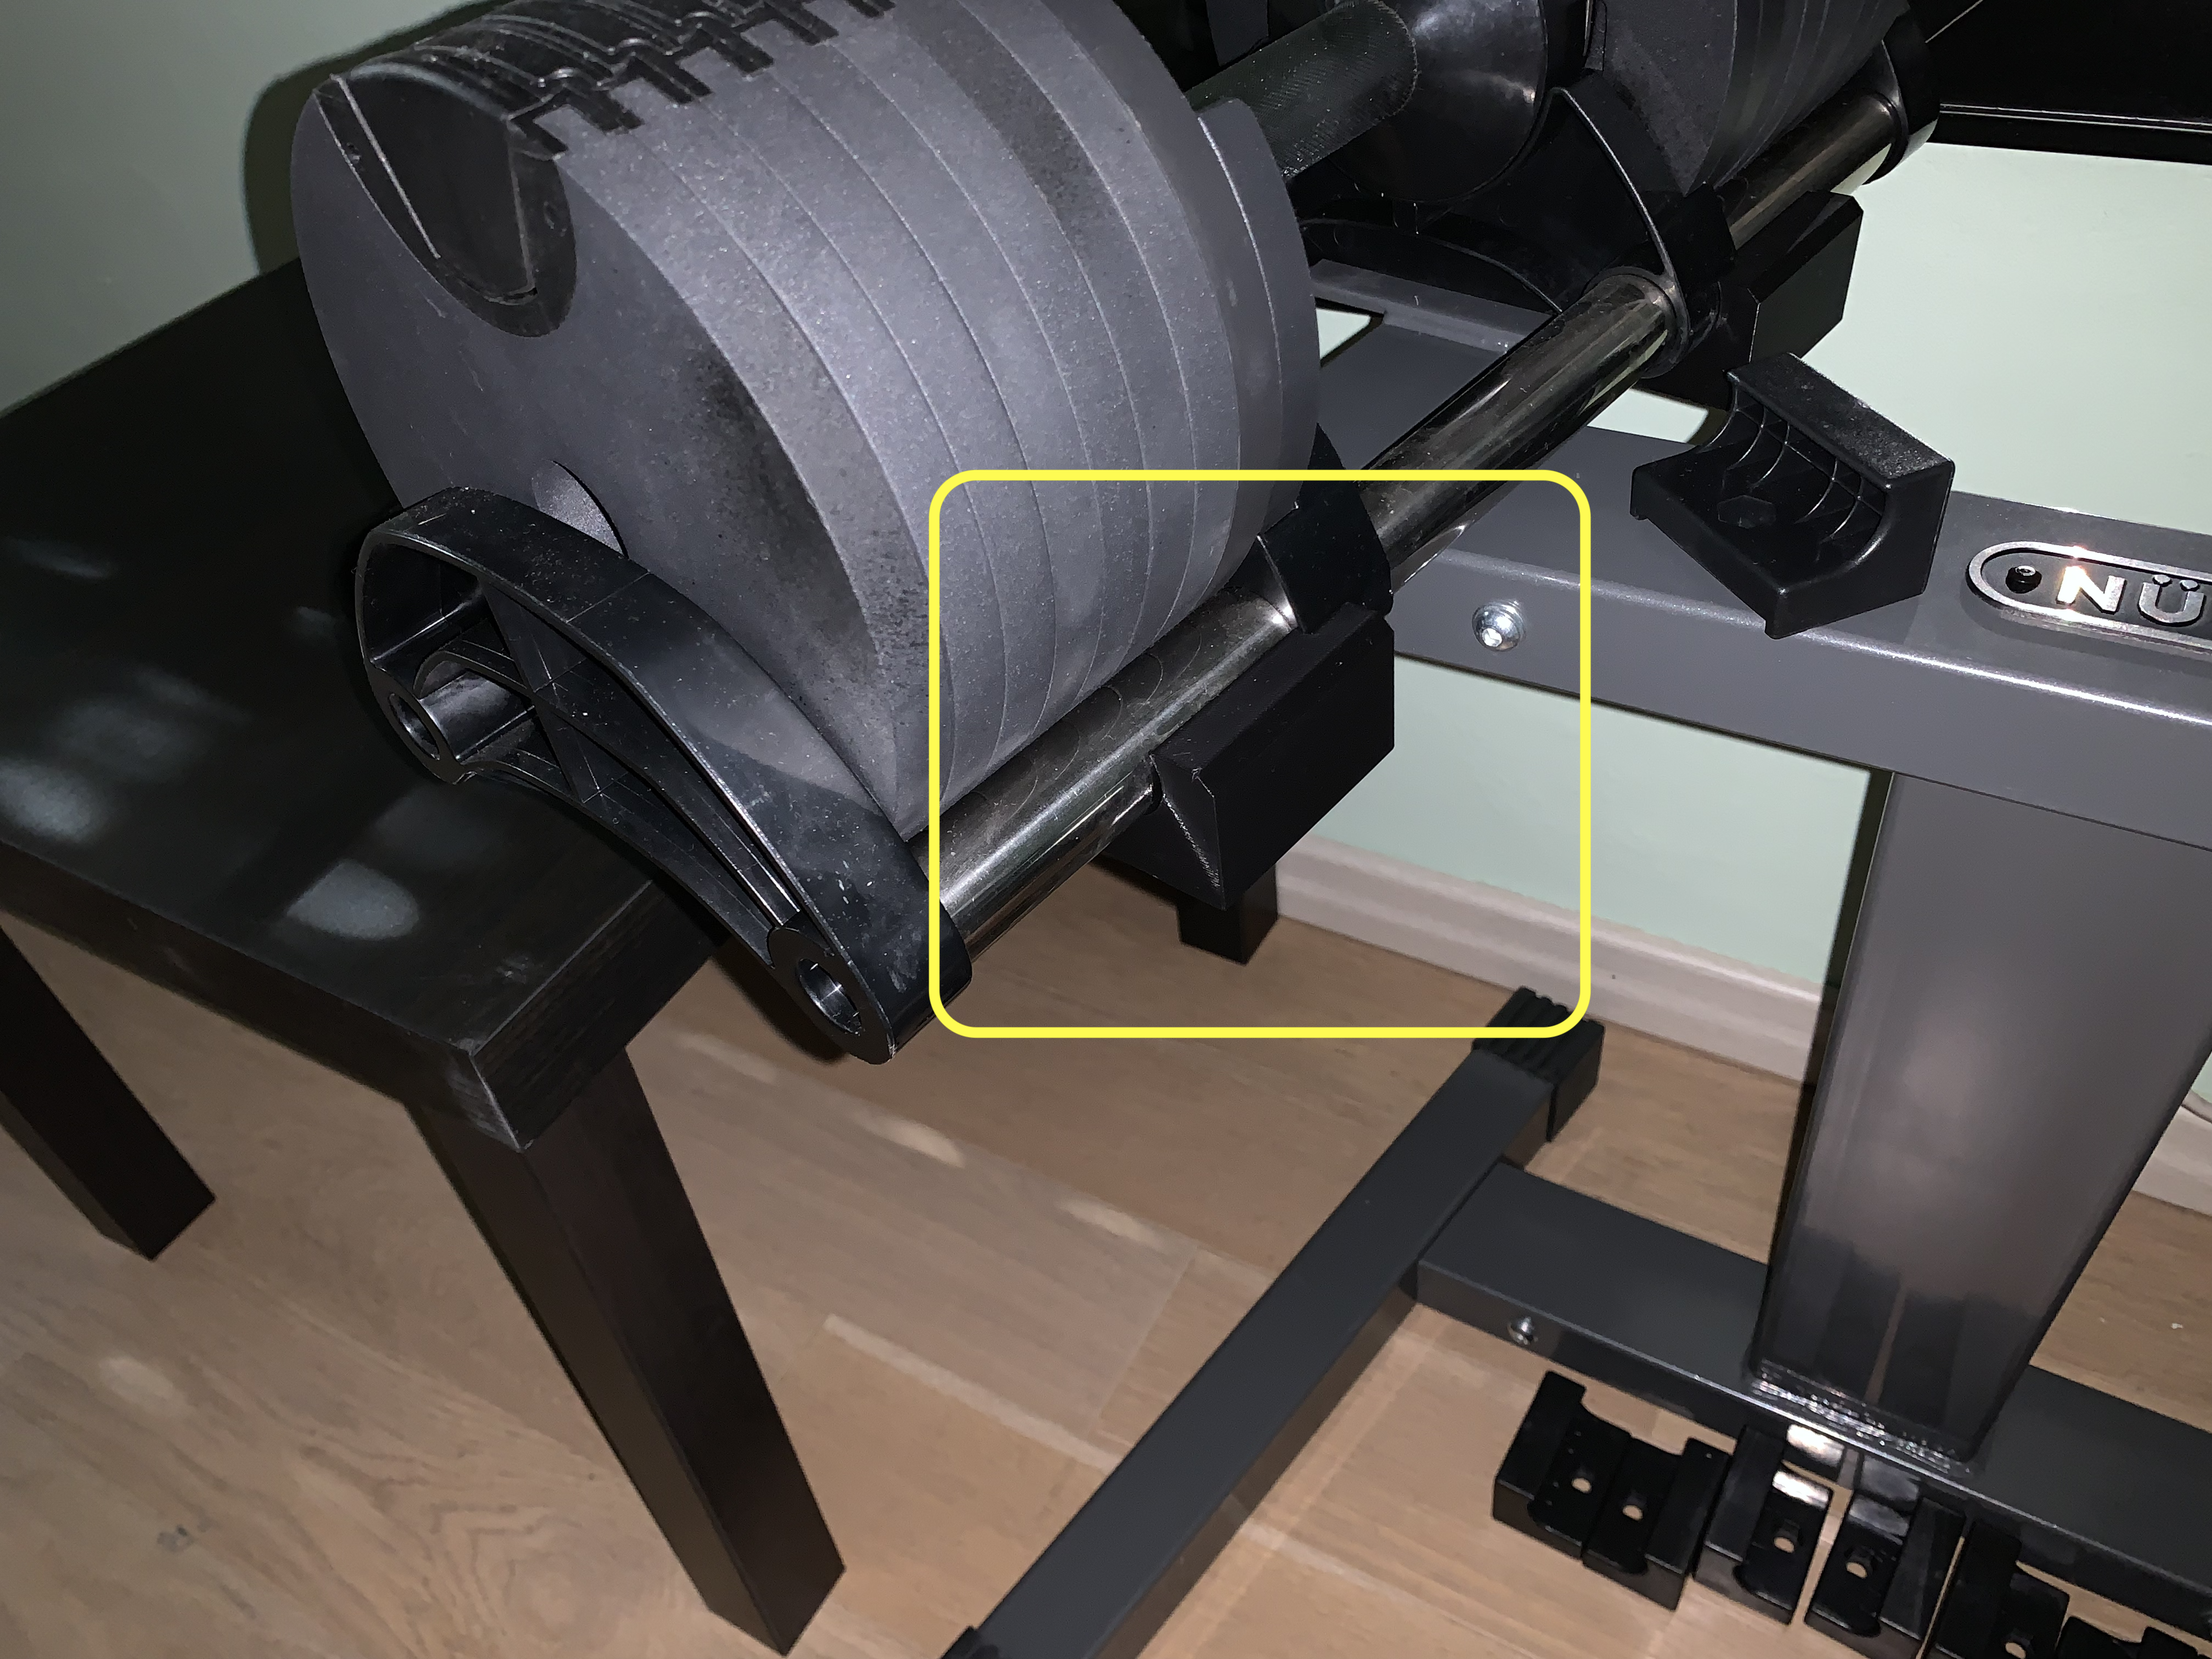 Adapter for adjustable dumbbells for the Nüo stand